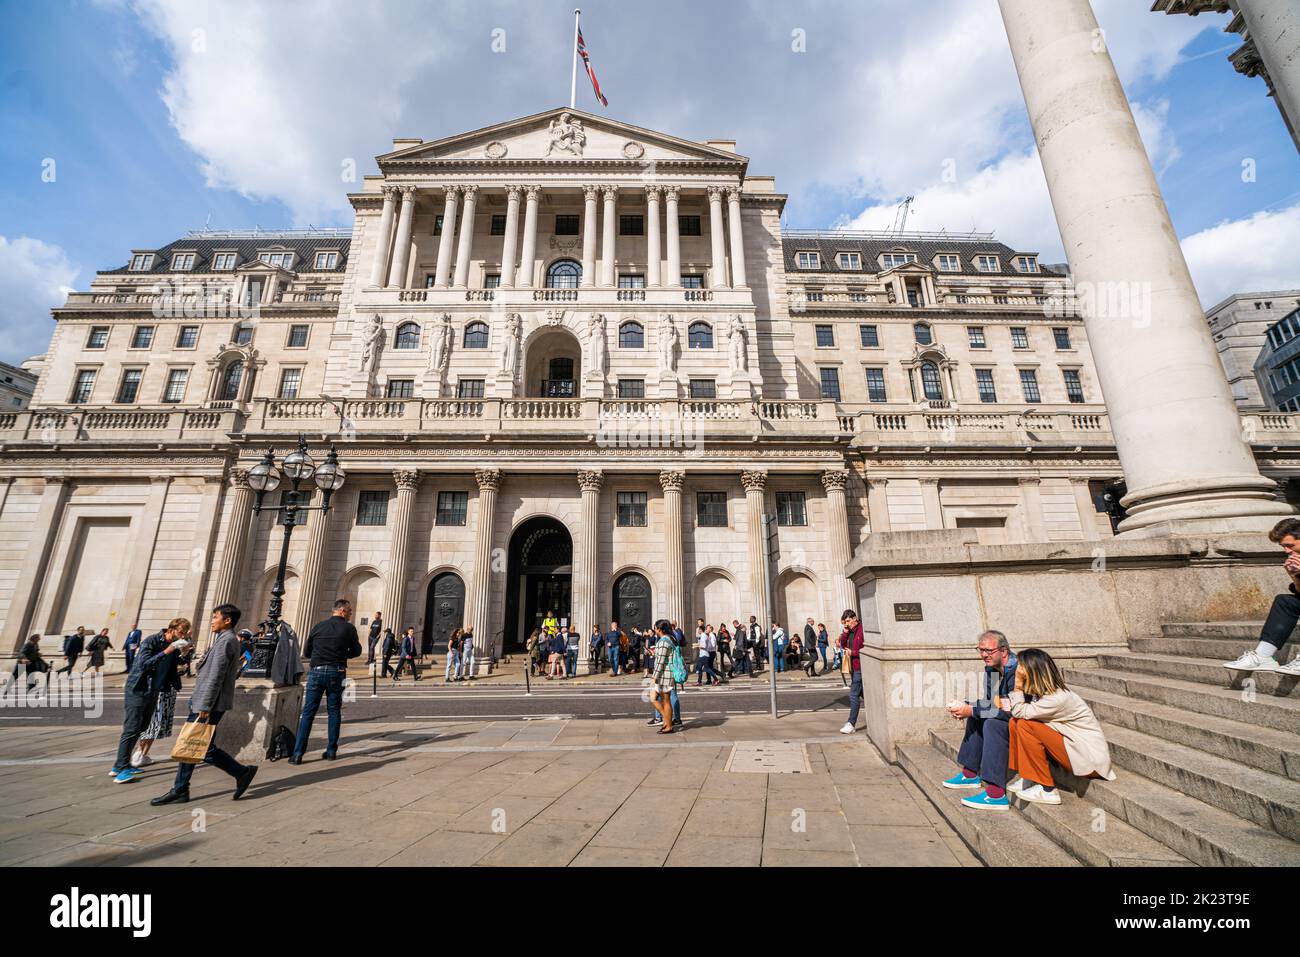 London UK. 22 September 2022.  A general view of Bank of England in Threadneedle street. The monetary committee of the Bank of England has announced  a rise in UK interest rates  from 1.75% to 2.25%  the highest increase  in a  14-year  period in order to slow down the soaring inflation affecting the cost of living. Credit: amer ghazzal/Alamy Live News. Stock Photo